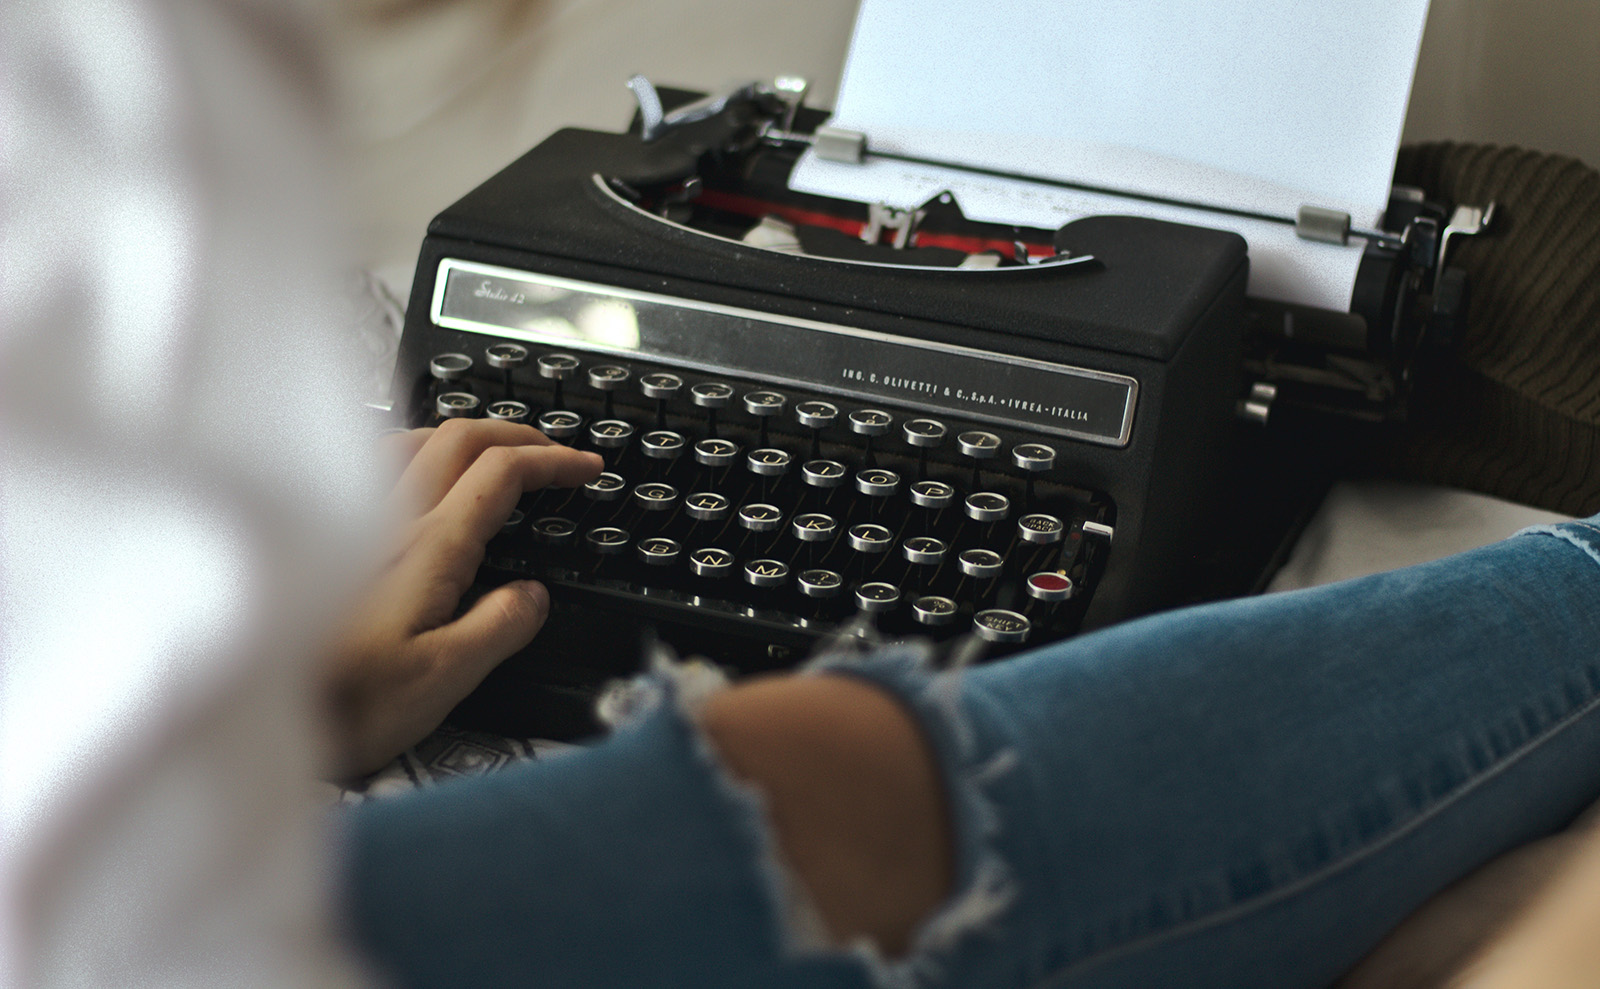  woman in a white shirt and torn blue jeans sitting on the floor in front of a typewriter